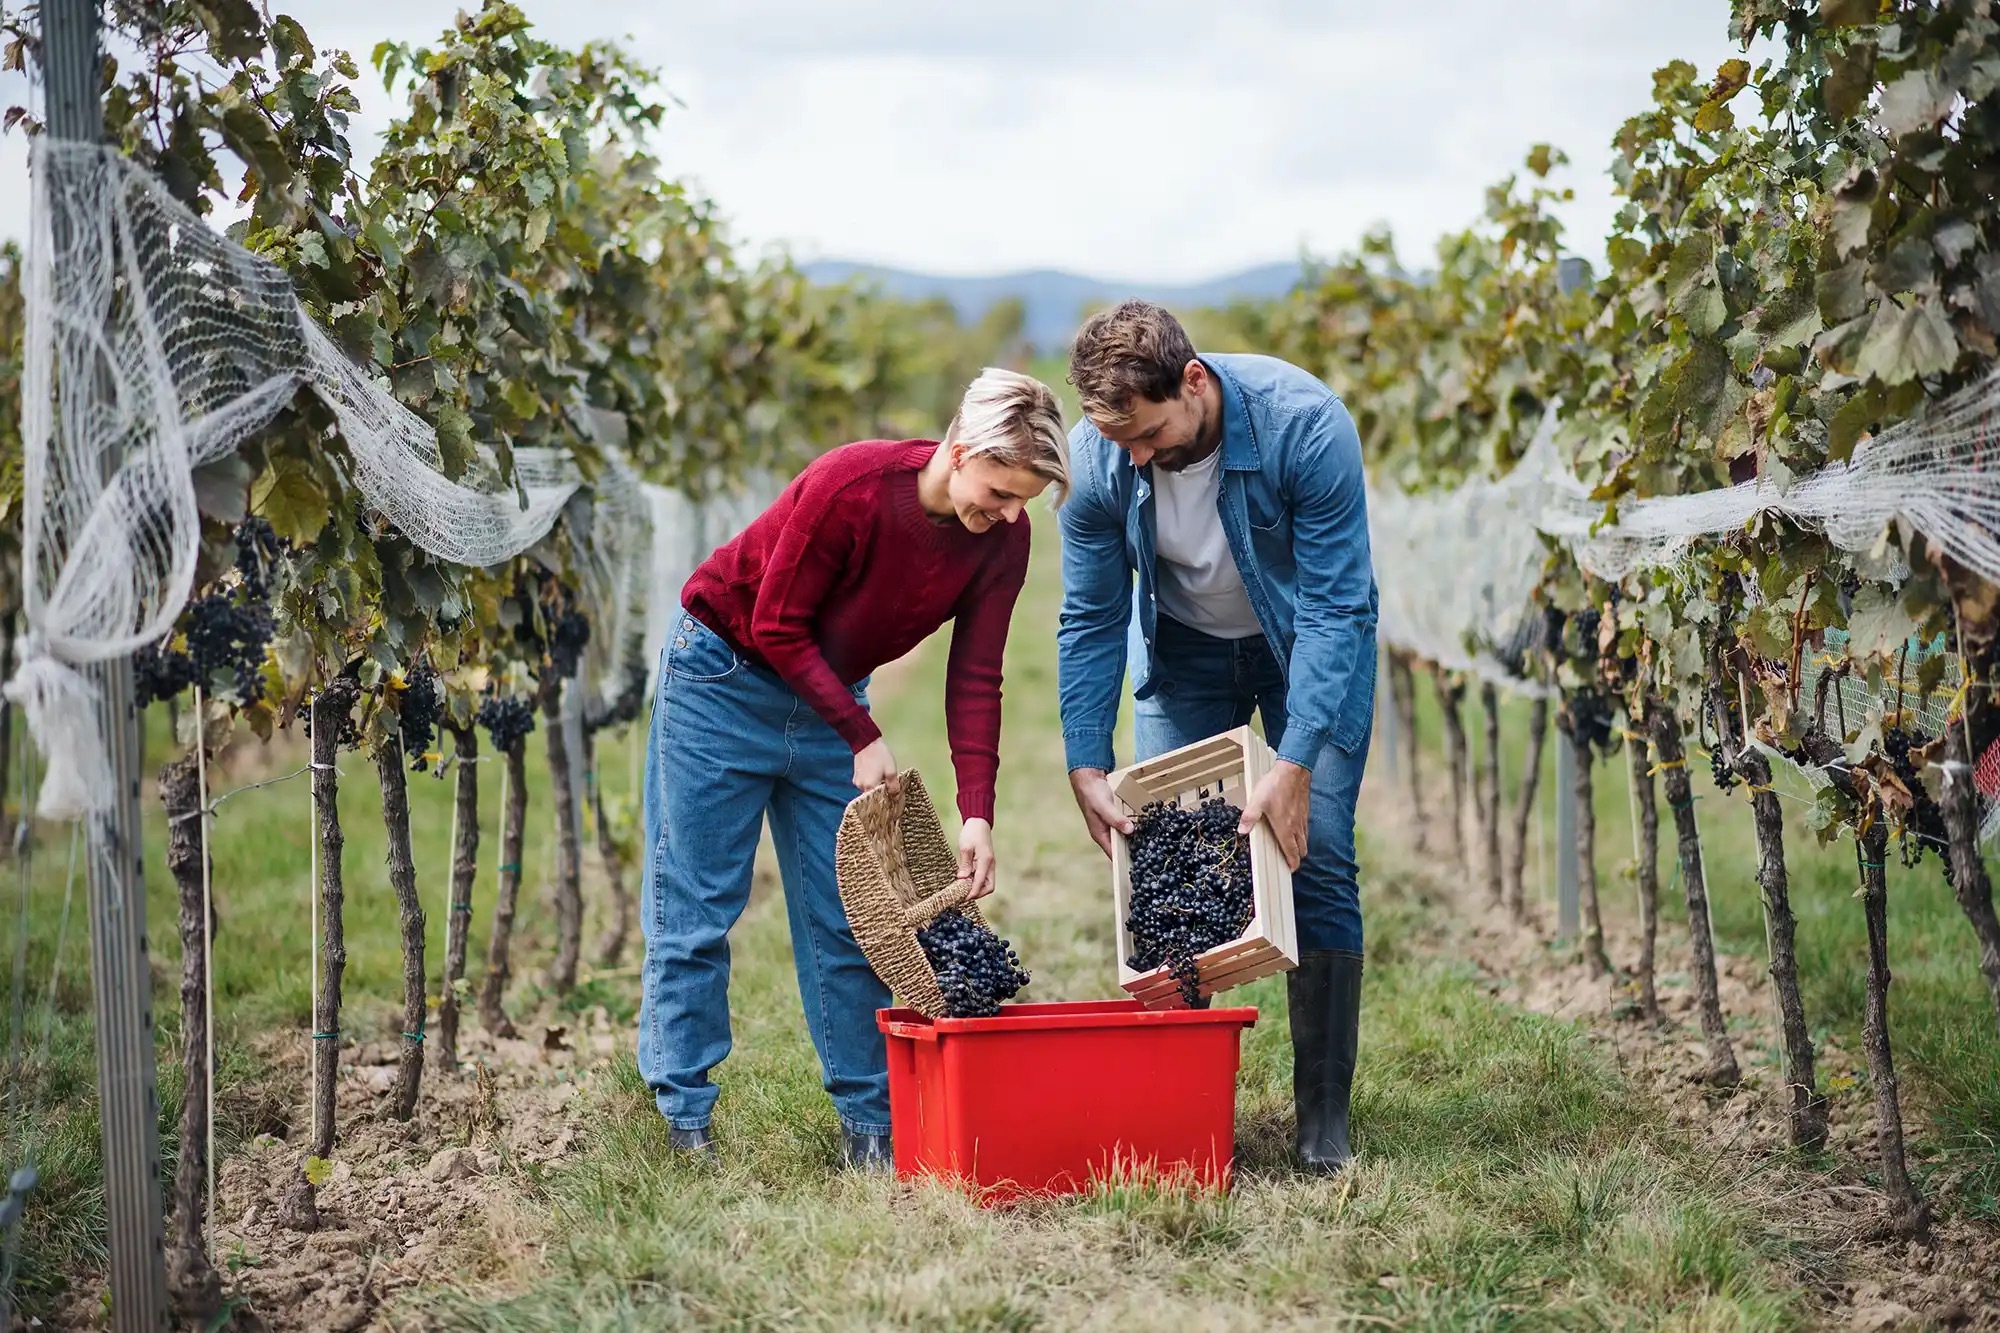 A young couple working hard in an orchard or winery.